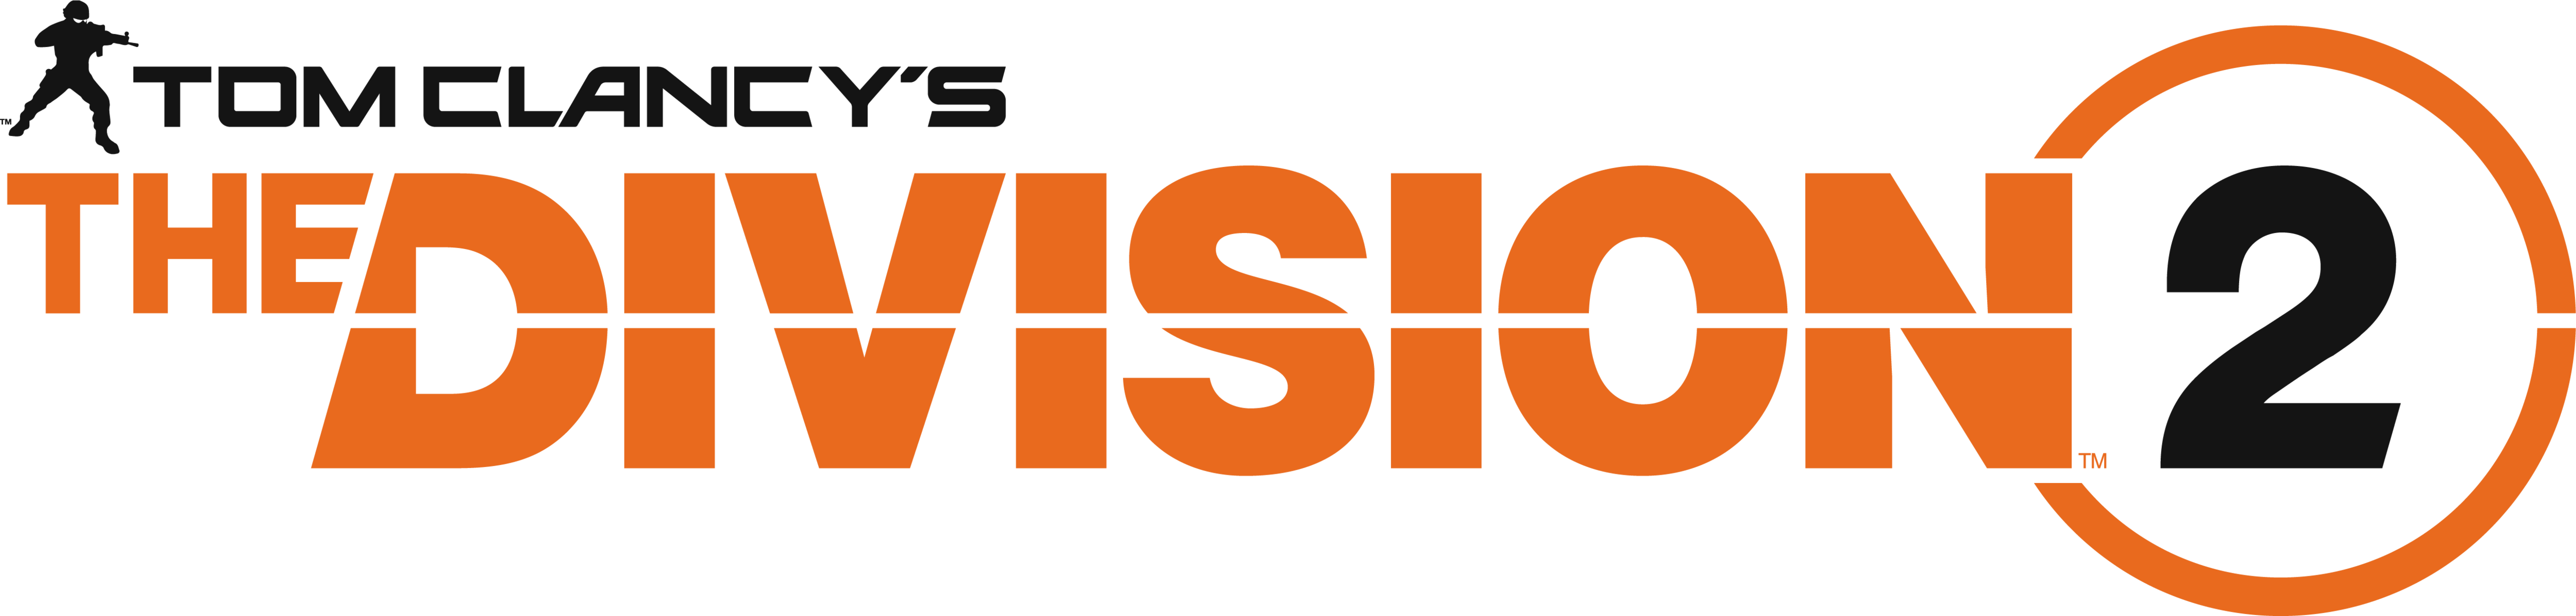 Tom Clancy's the Division Logo - Community Podcast | Latest news and content about Tom Clancy's The ...